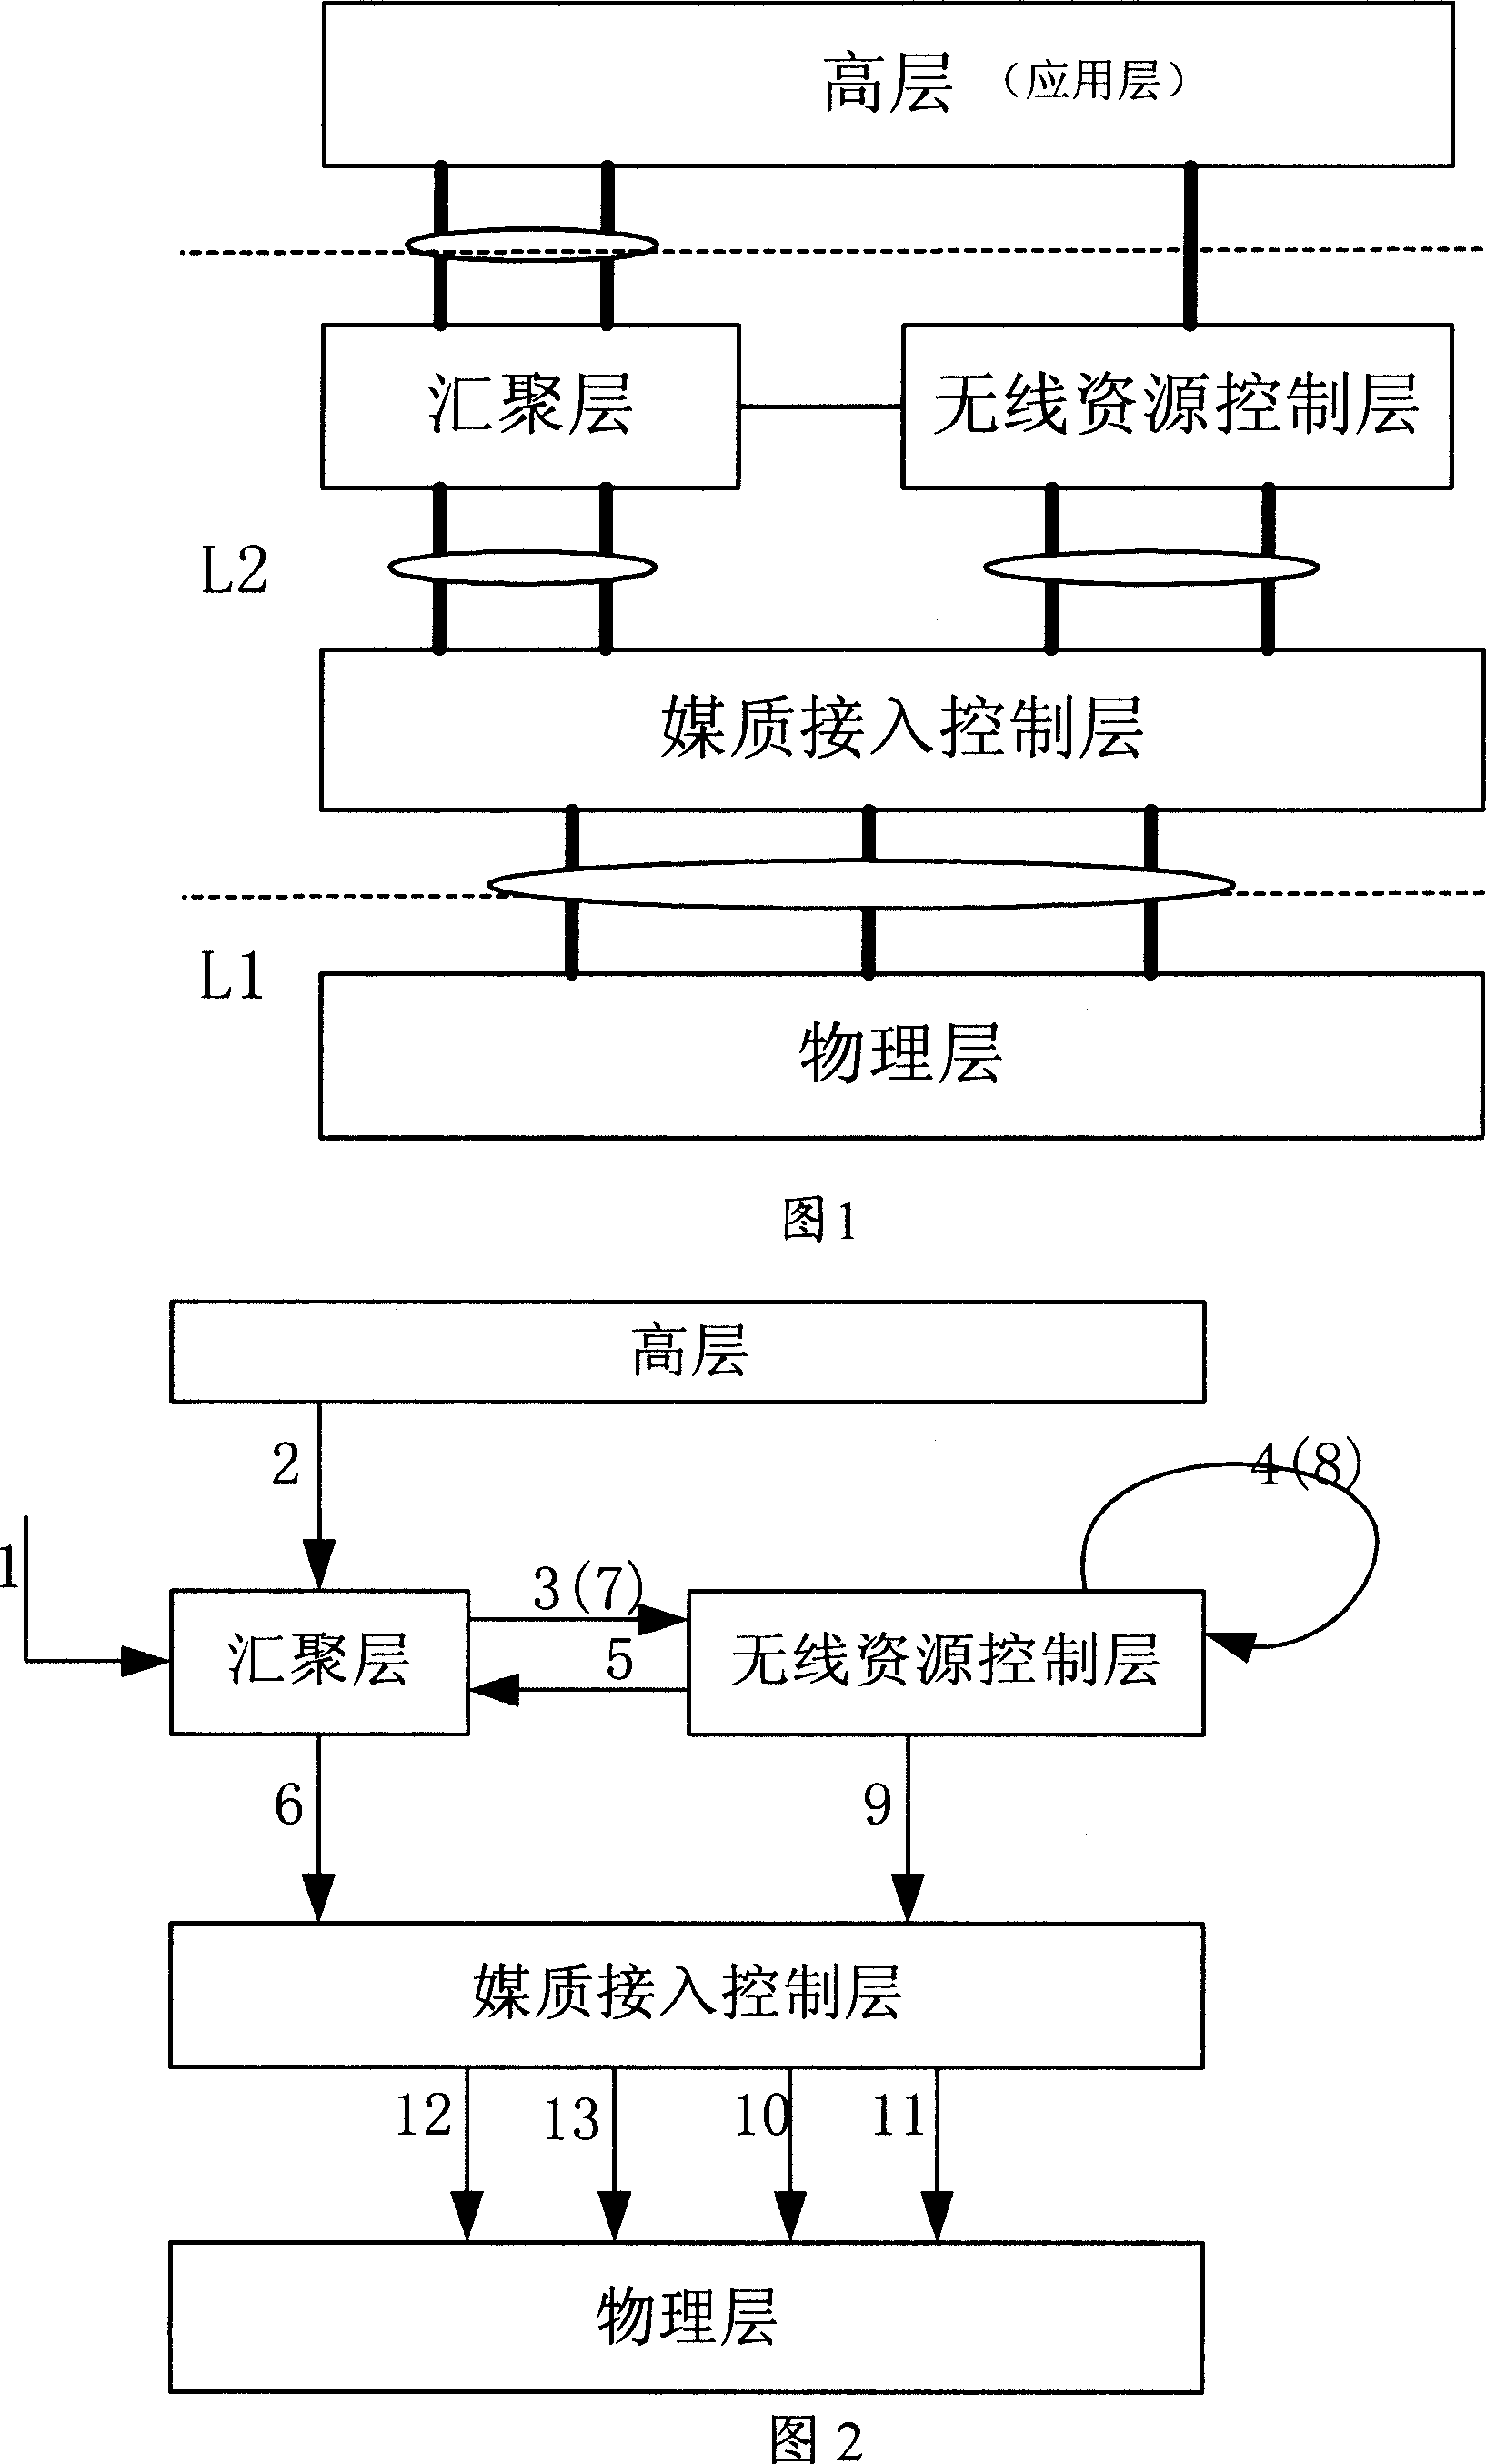 Sending system, method and receiving system for video broadcasting system